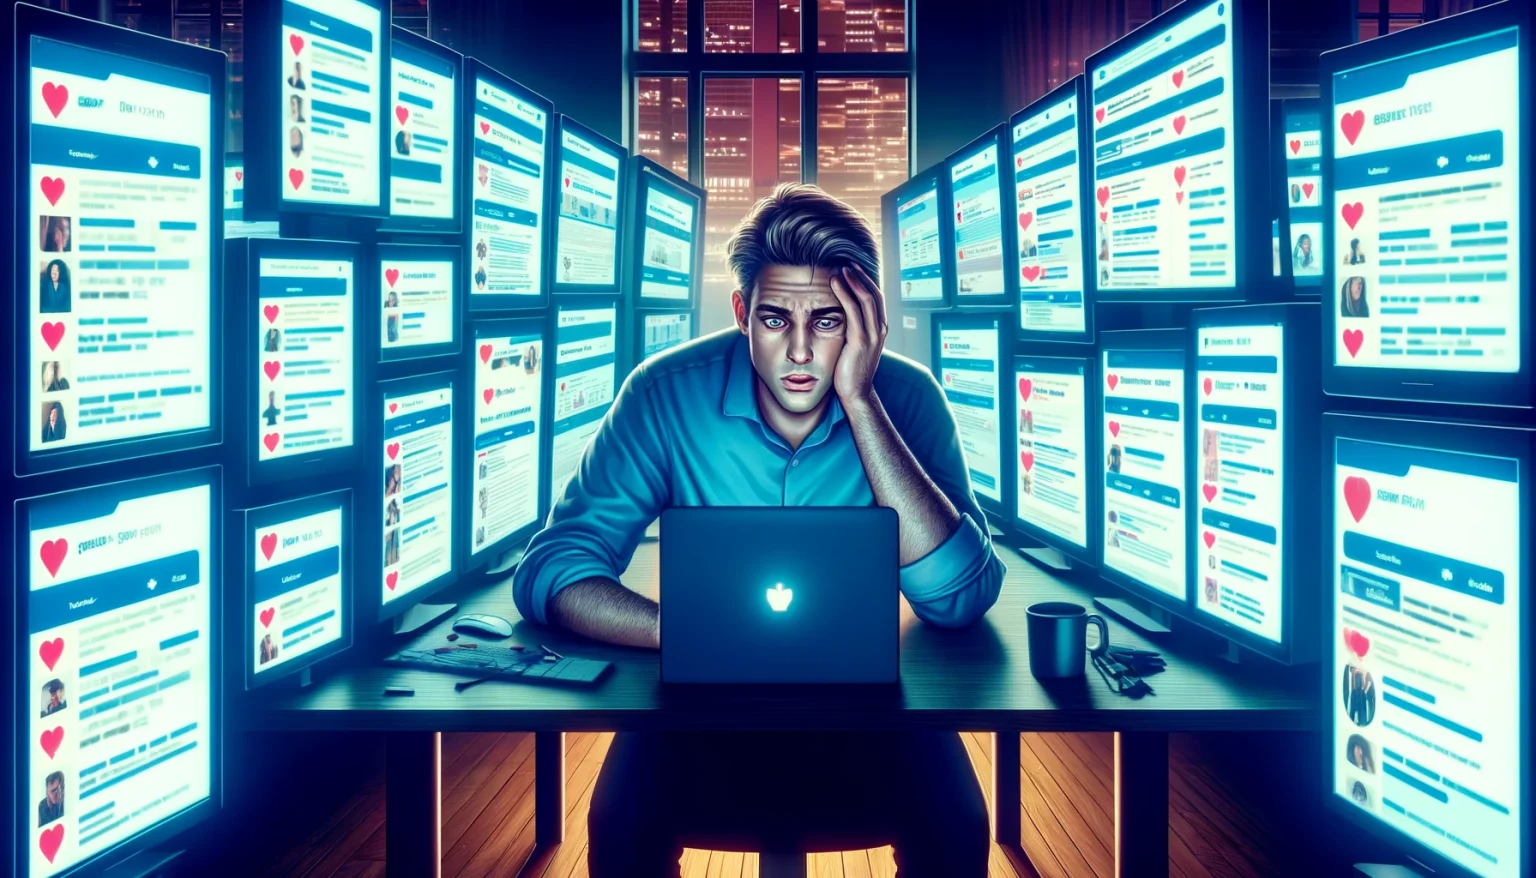 A young man surrounded by multiple glowing screens from various dating apps.